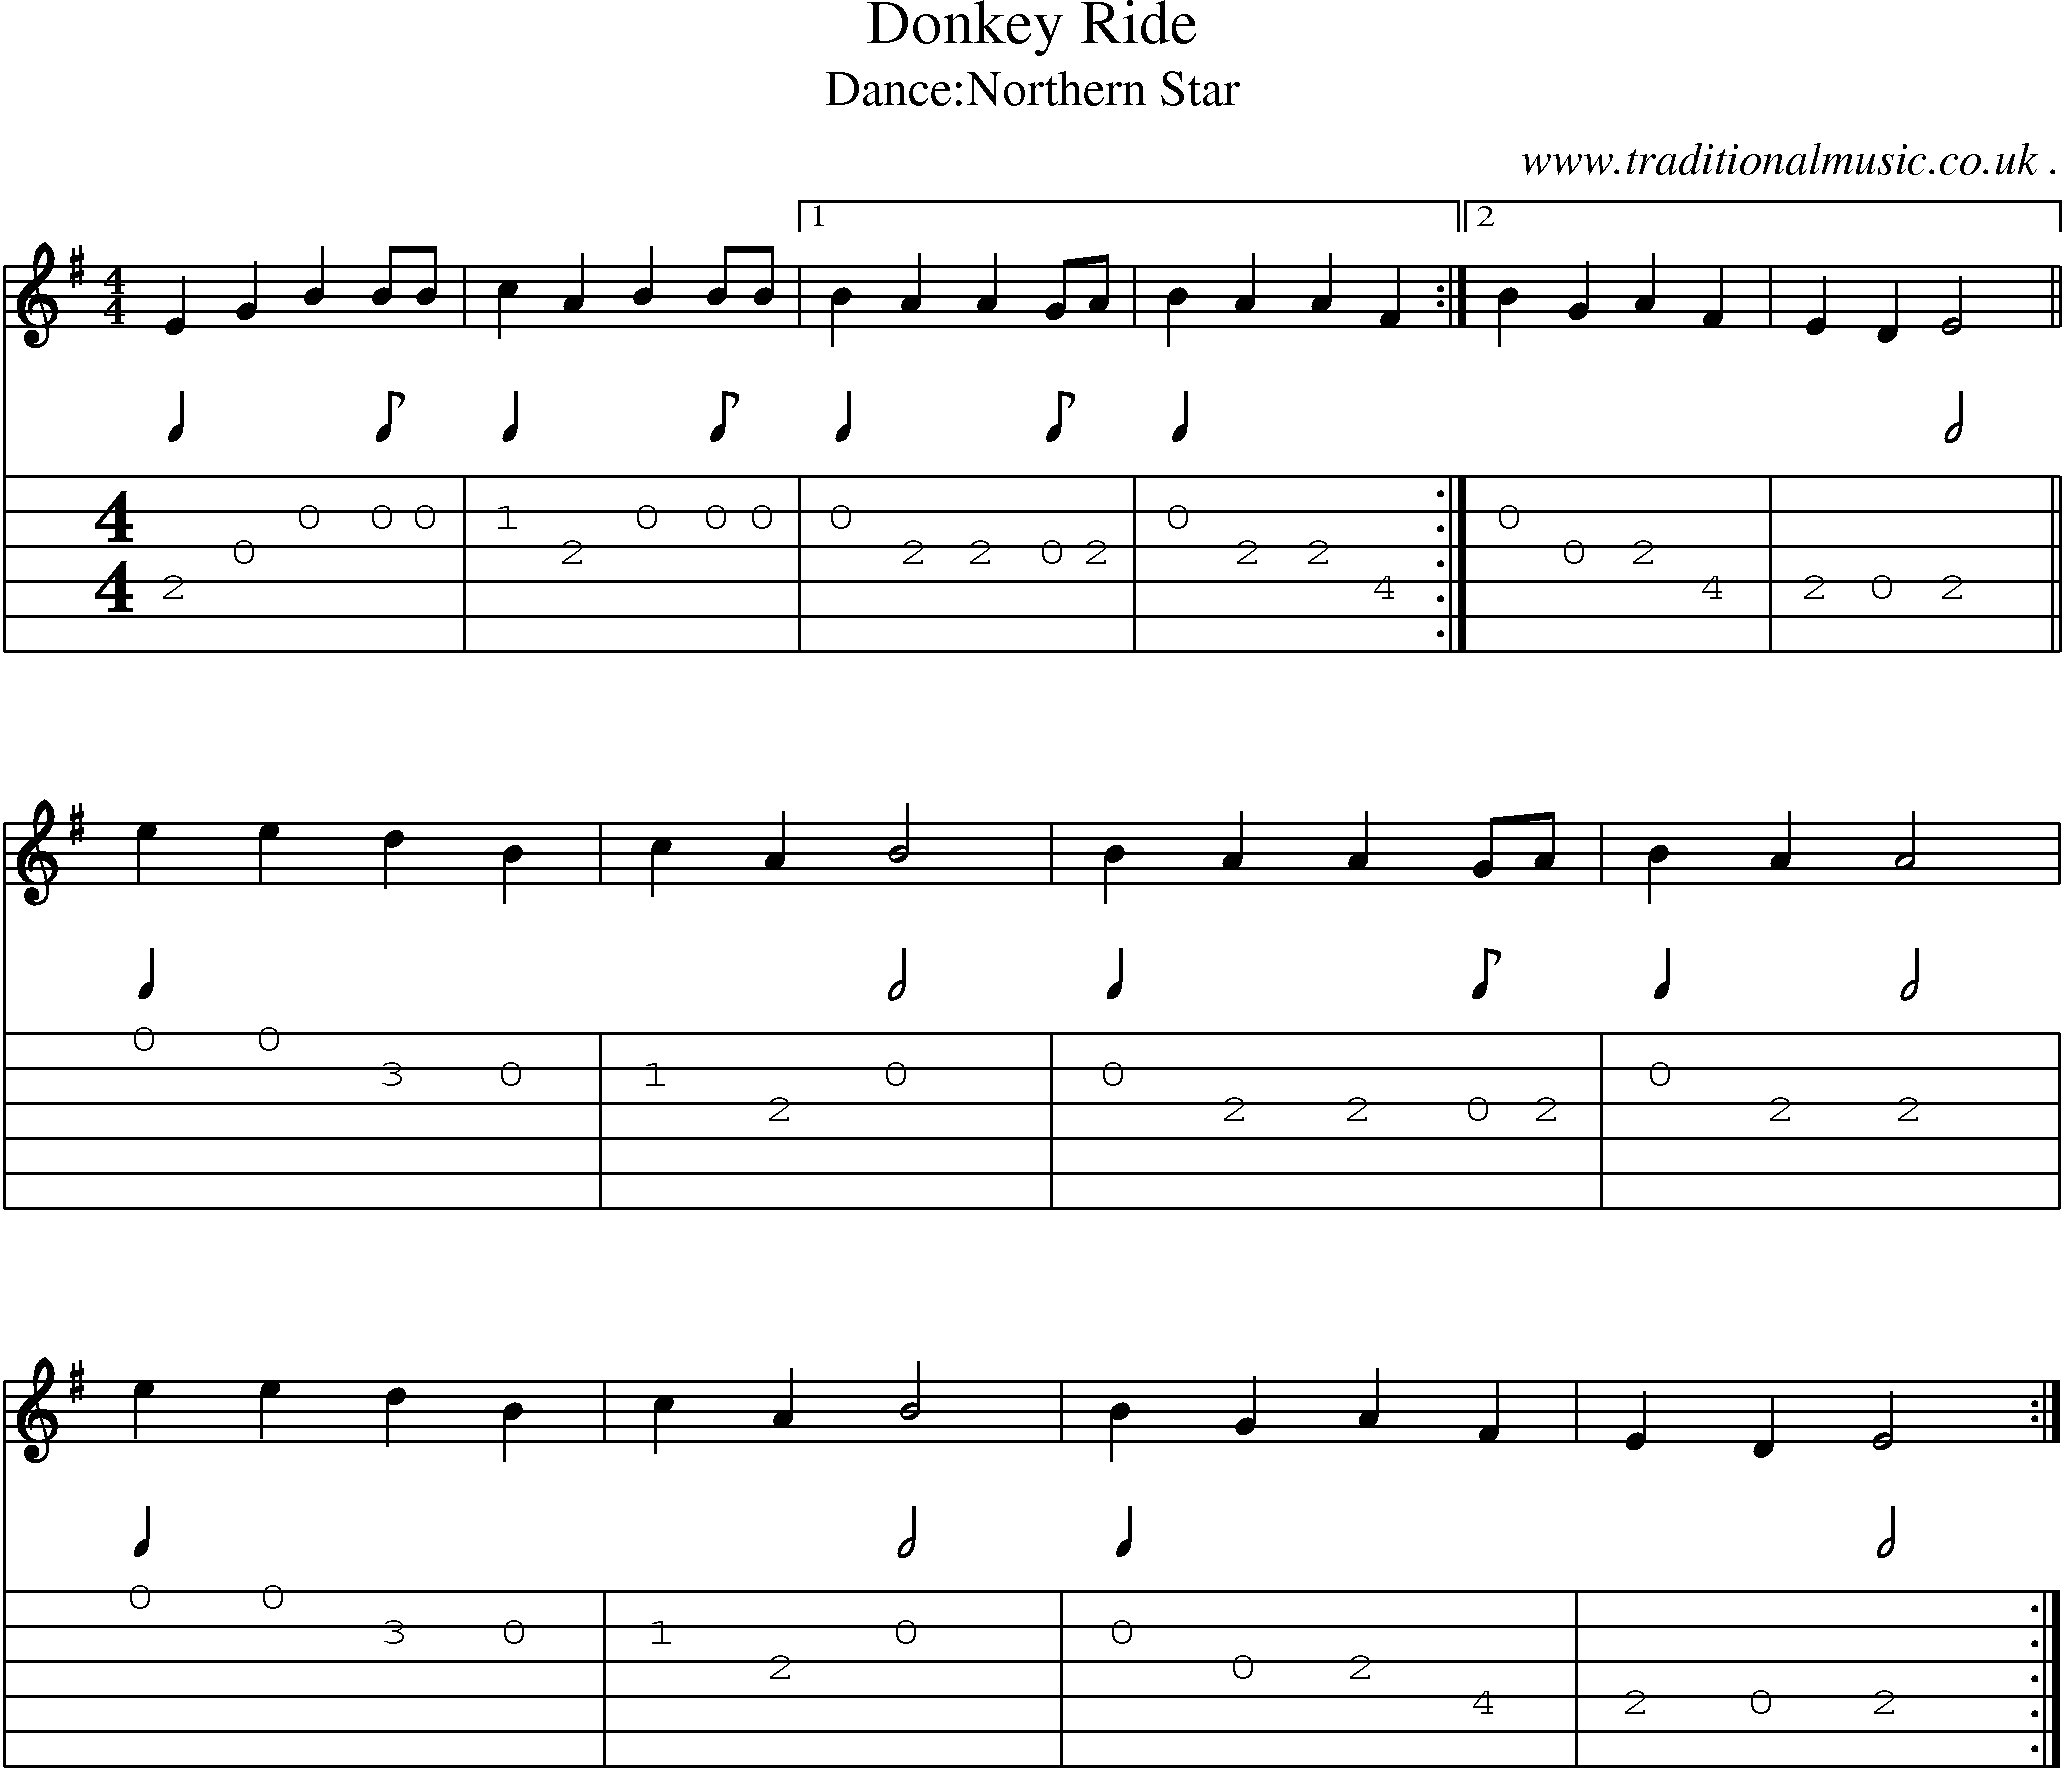 Sheet-Music and Guitar Tabs for Donkey Ride